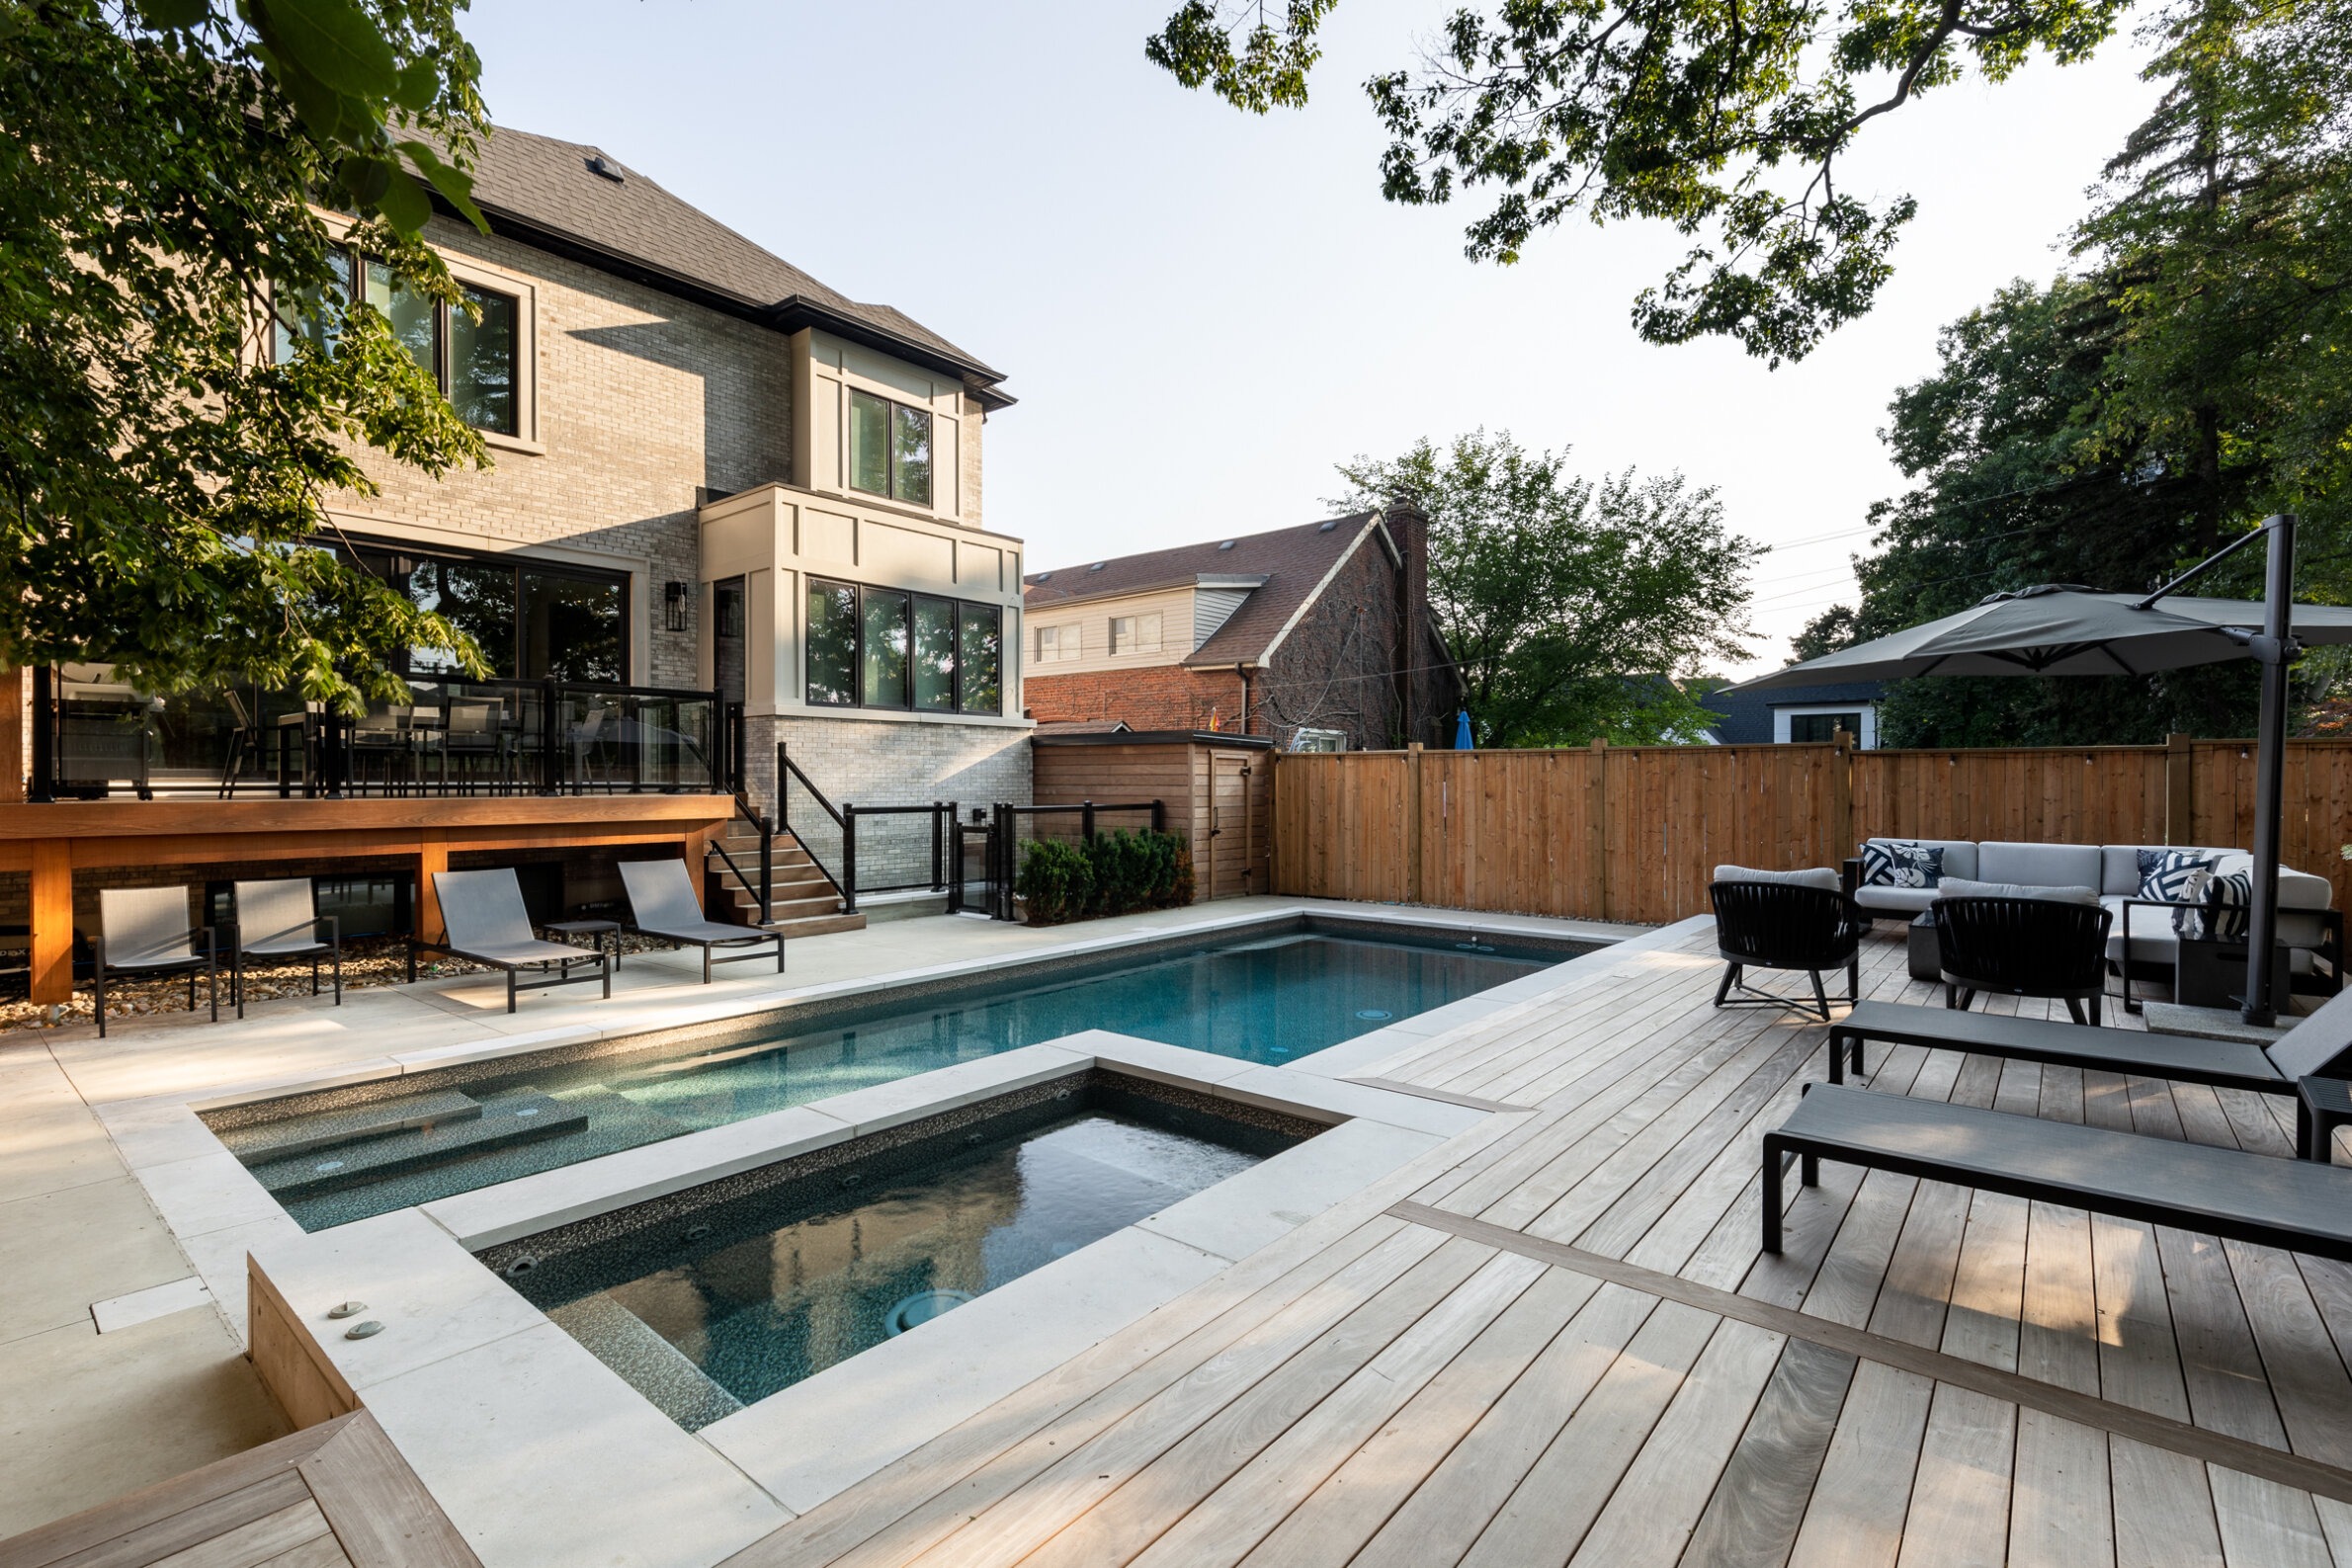 A modern backyard with a swimming pool, hot tub, wooden deck, outdoor furniture, and a two-story house with large windows during daylight.